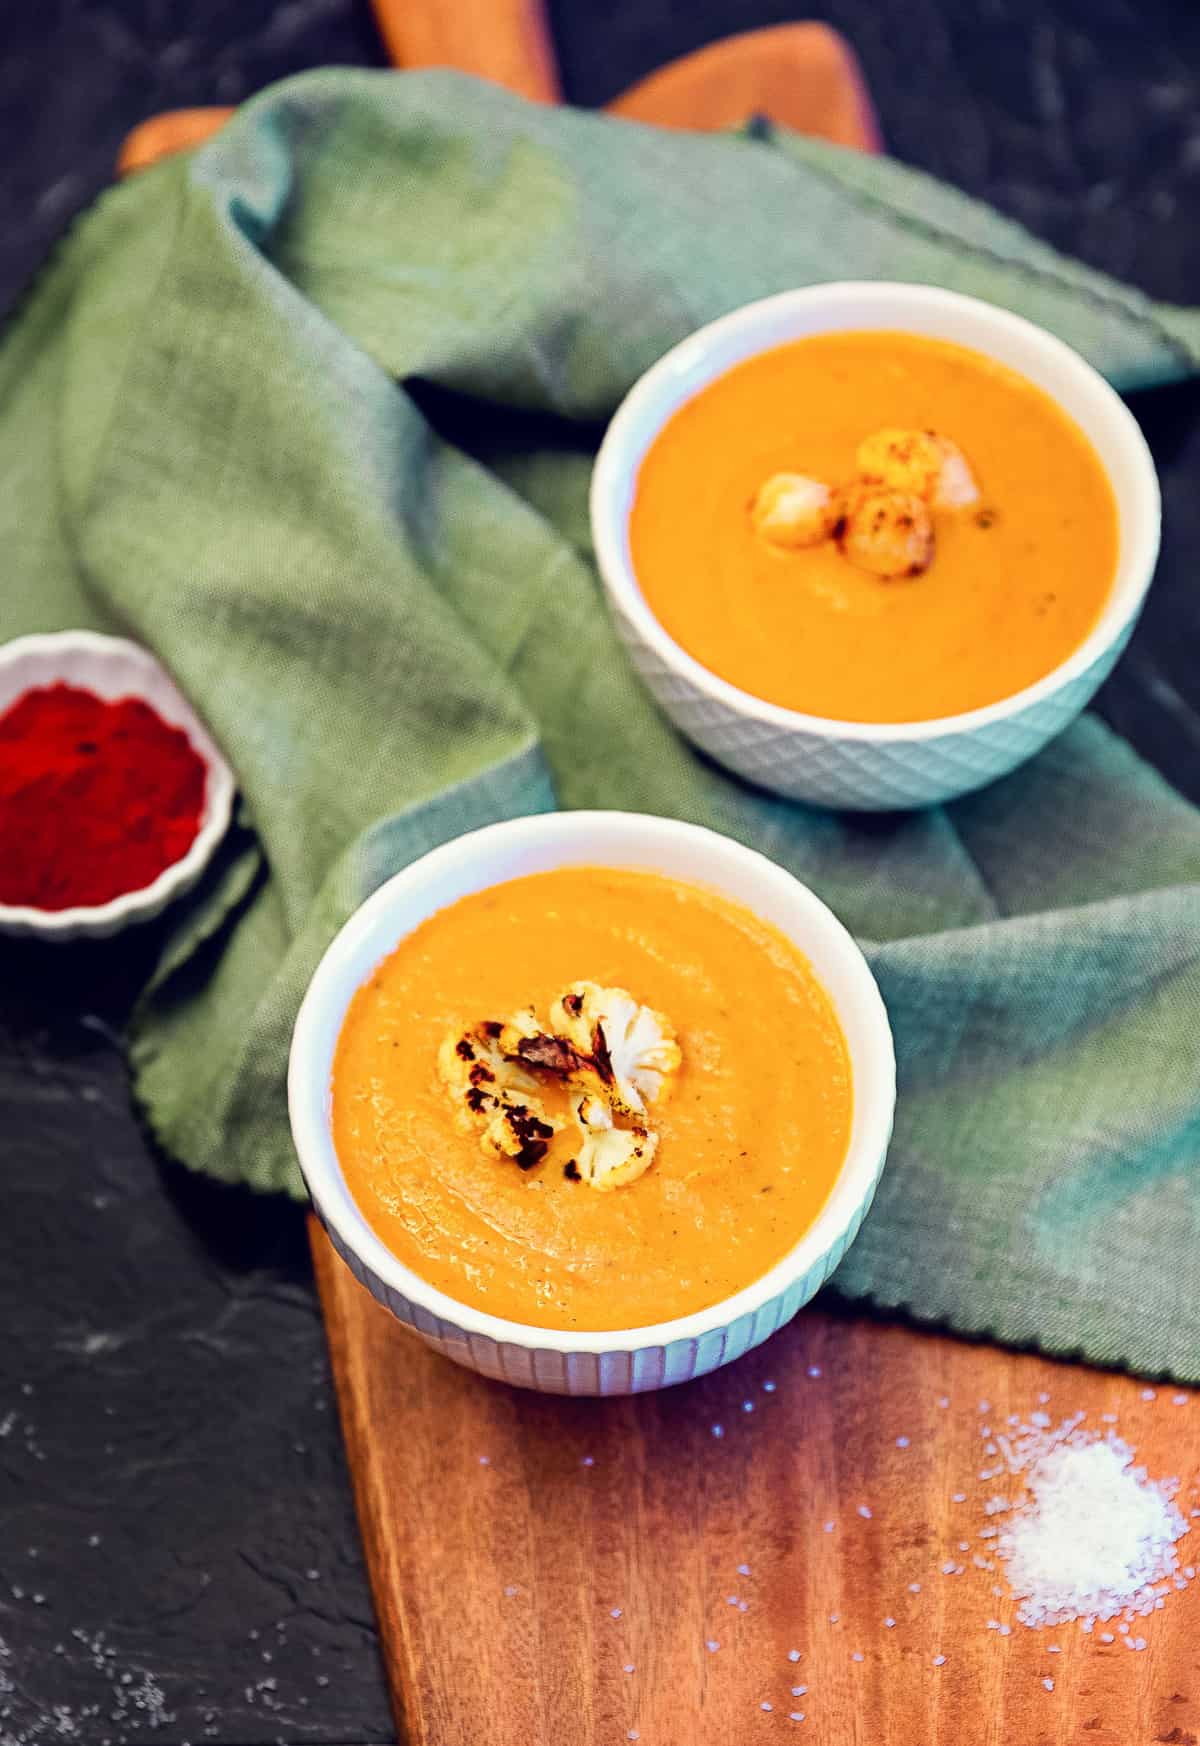 rustic spicy cauliflower soup, rustic, spicy, cauliflower, soup, whole food plant based, whole food, plant based, healthy, no oil, oil free, refined sugar free, lunch, dinner, side, starter, appetizer